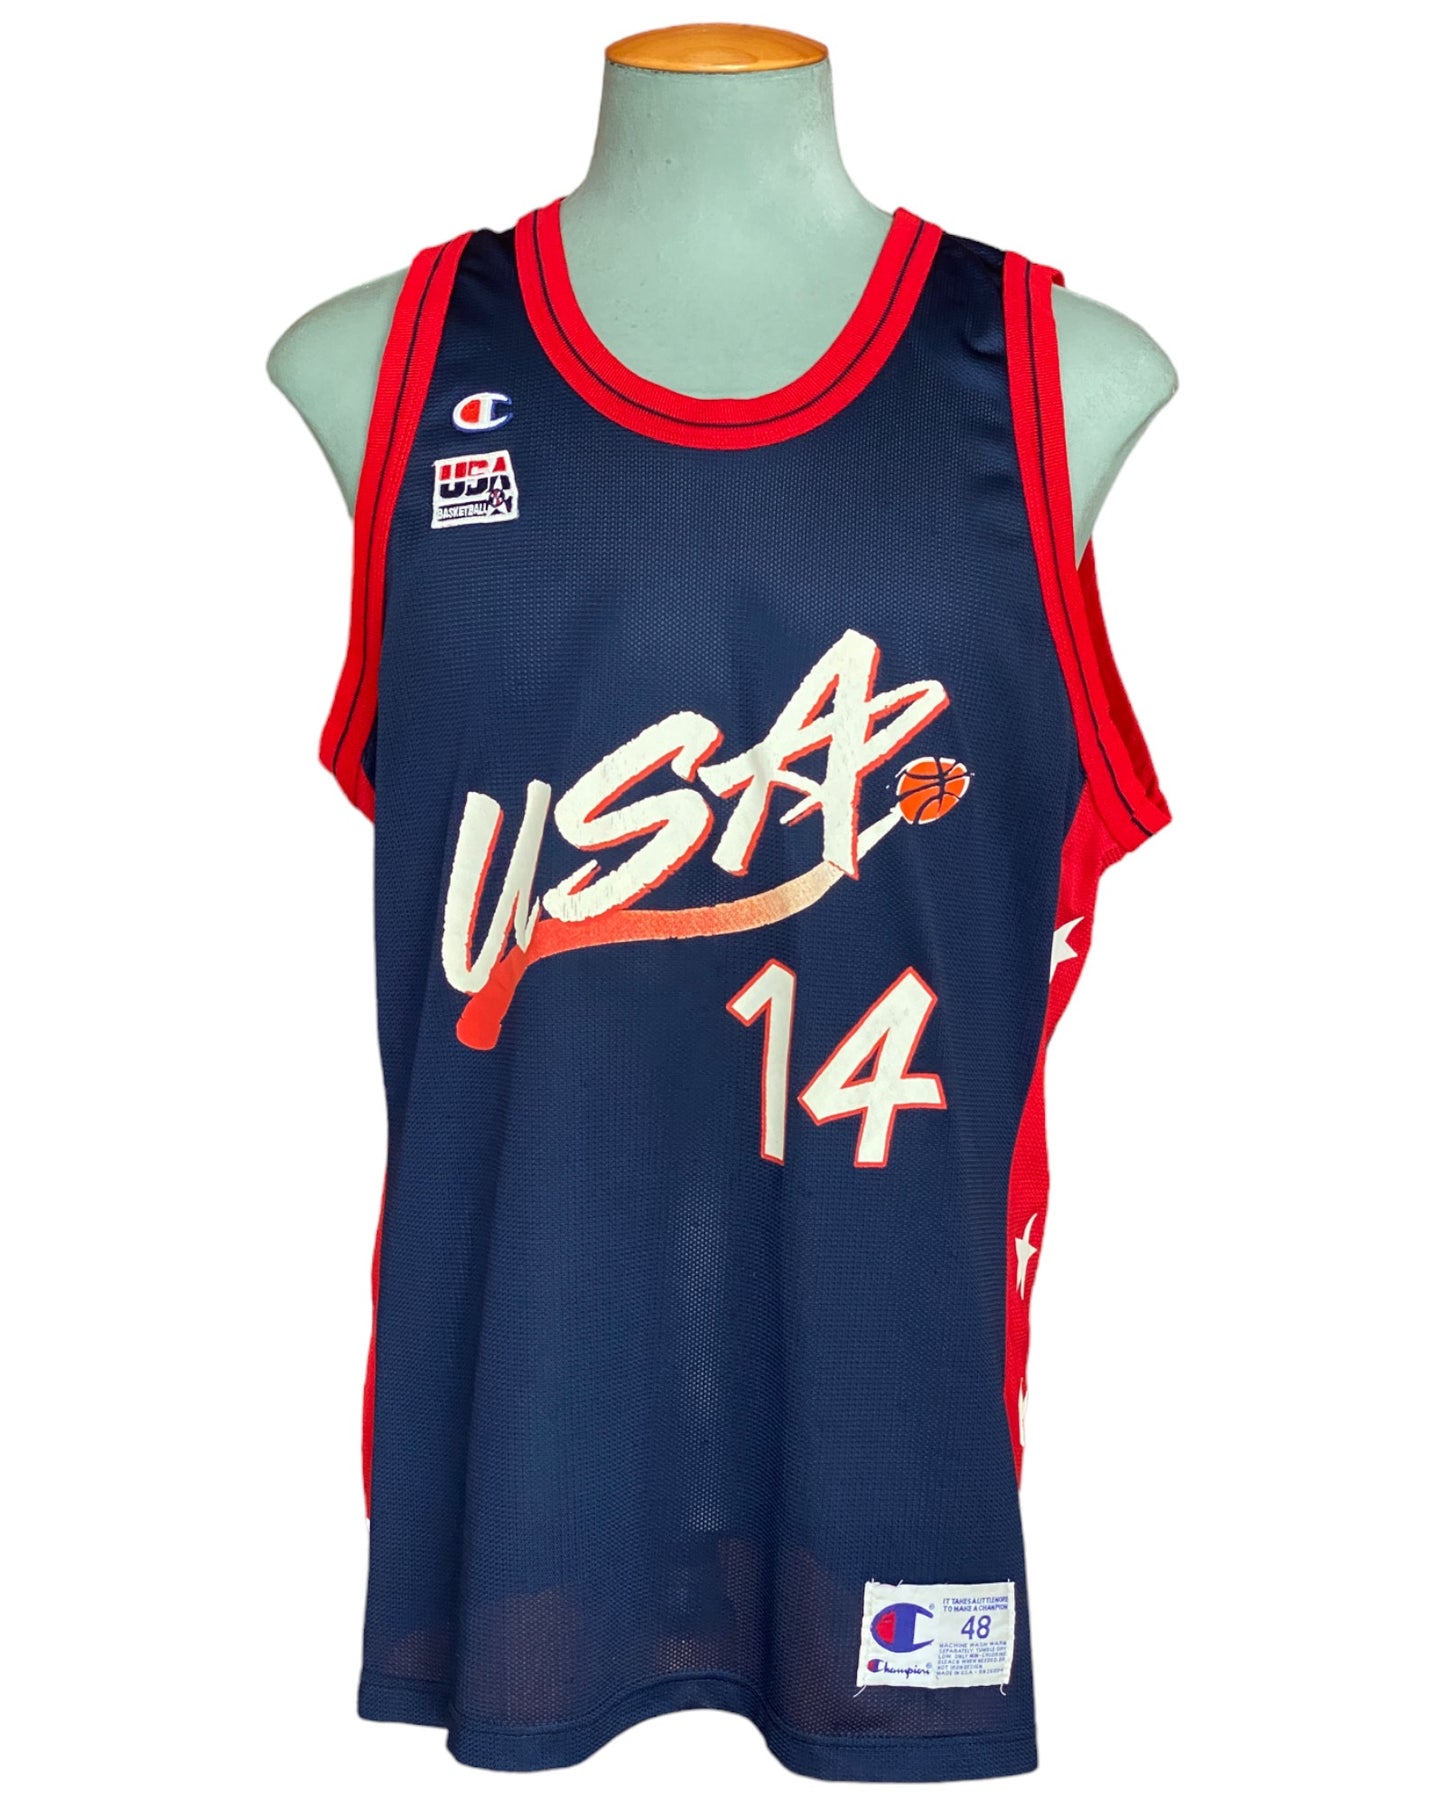 Size 48 David Robinson #14 Vintage Dream Team Olympic Champion NBA Jersey - Made in USA - Front View